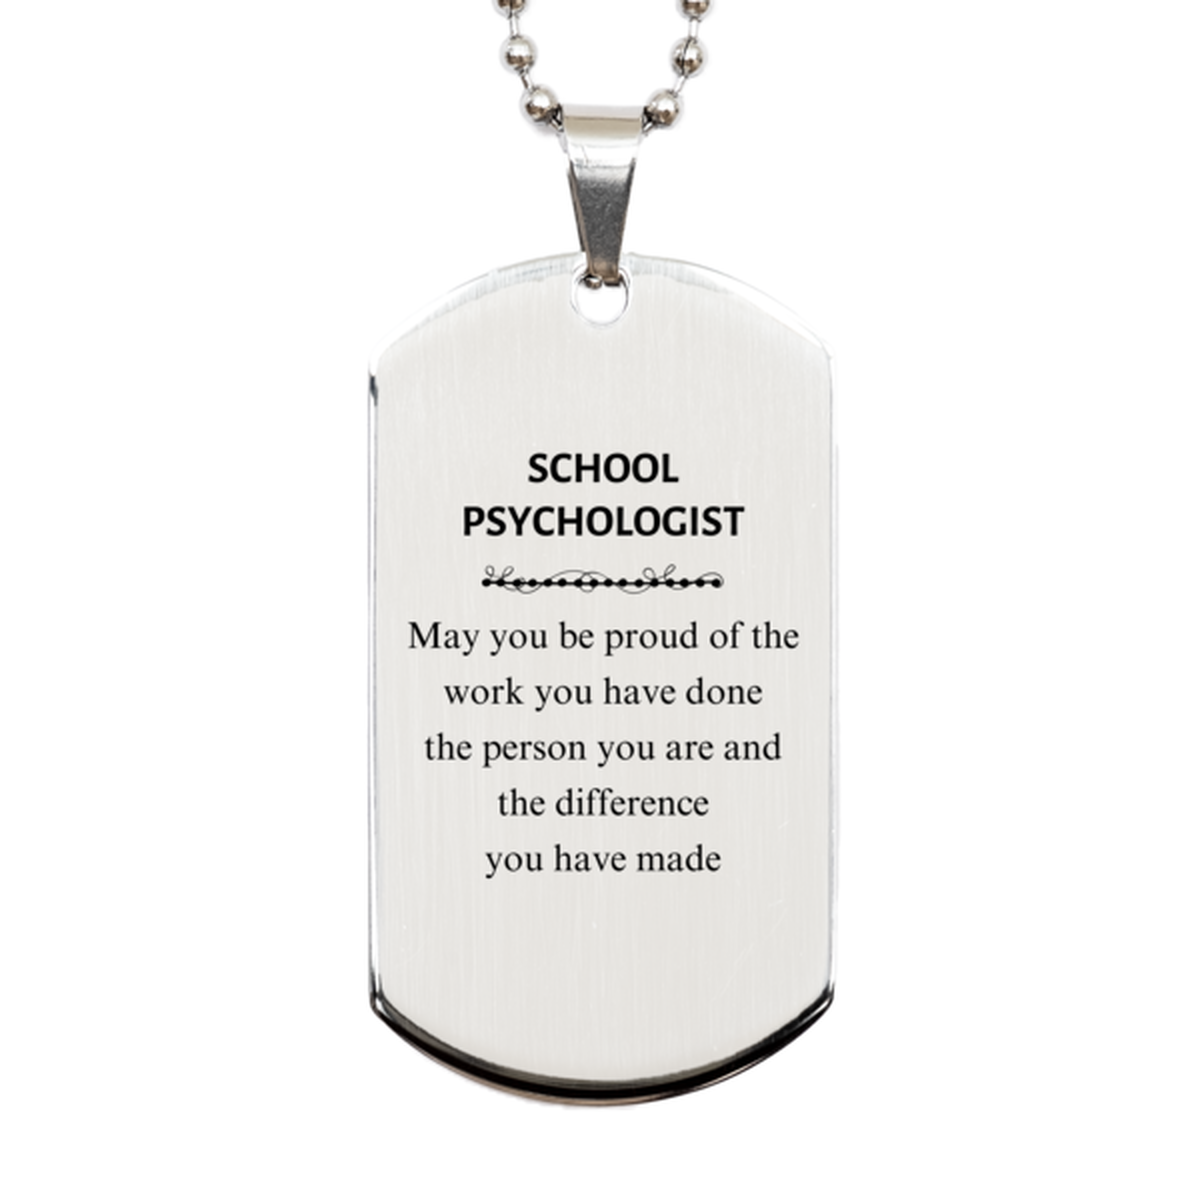 School Psychologist May you be proud of the work you have done, Retirement School Psychologist Silver Dog Tag for Colleague Appreciation Gifts Amazing for School Psychologist